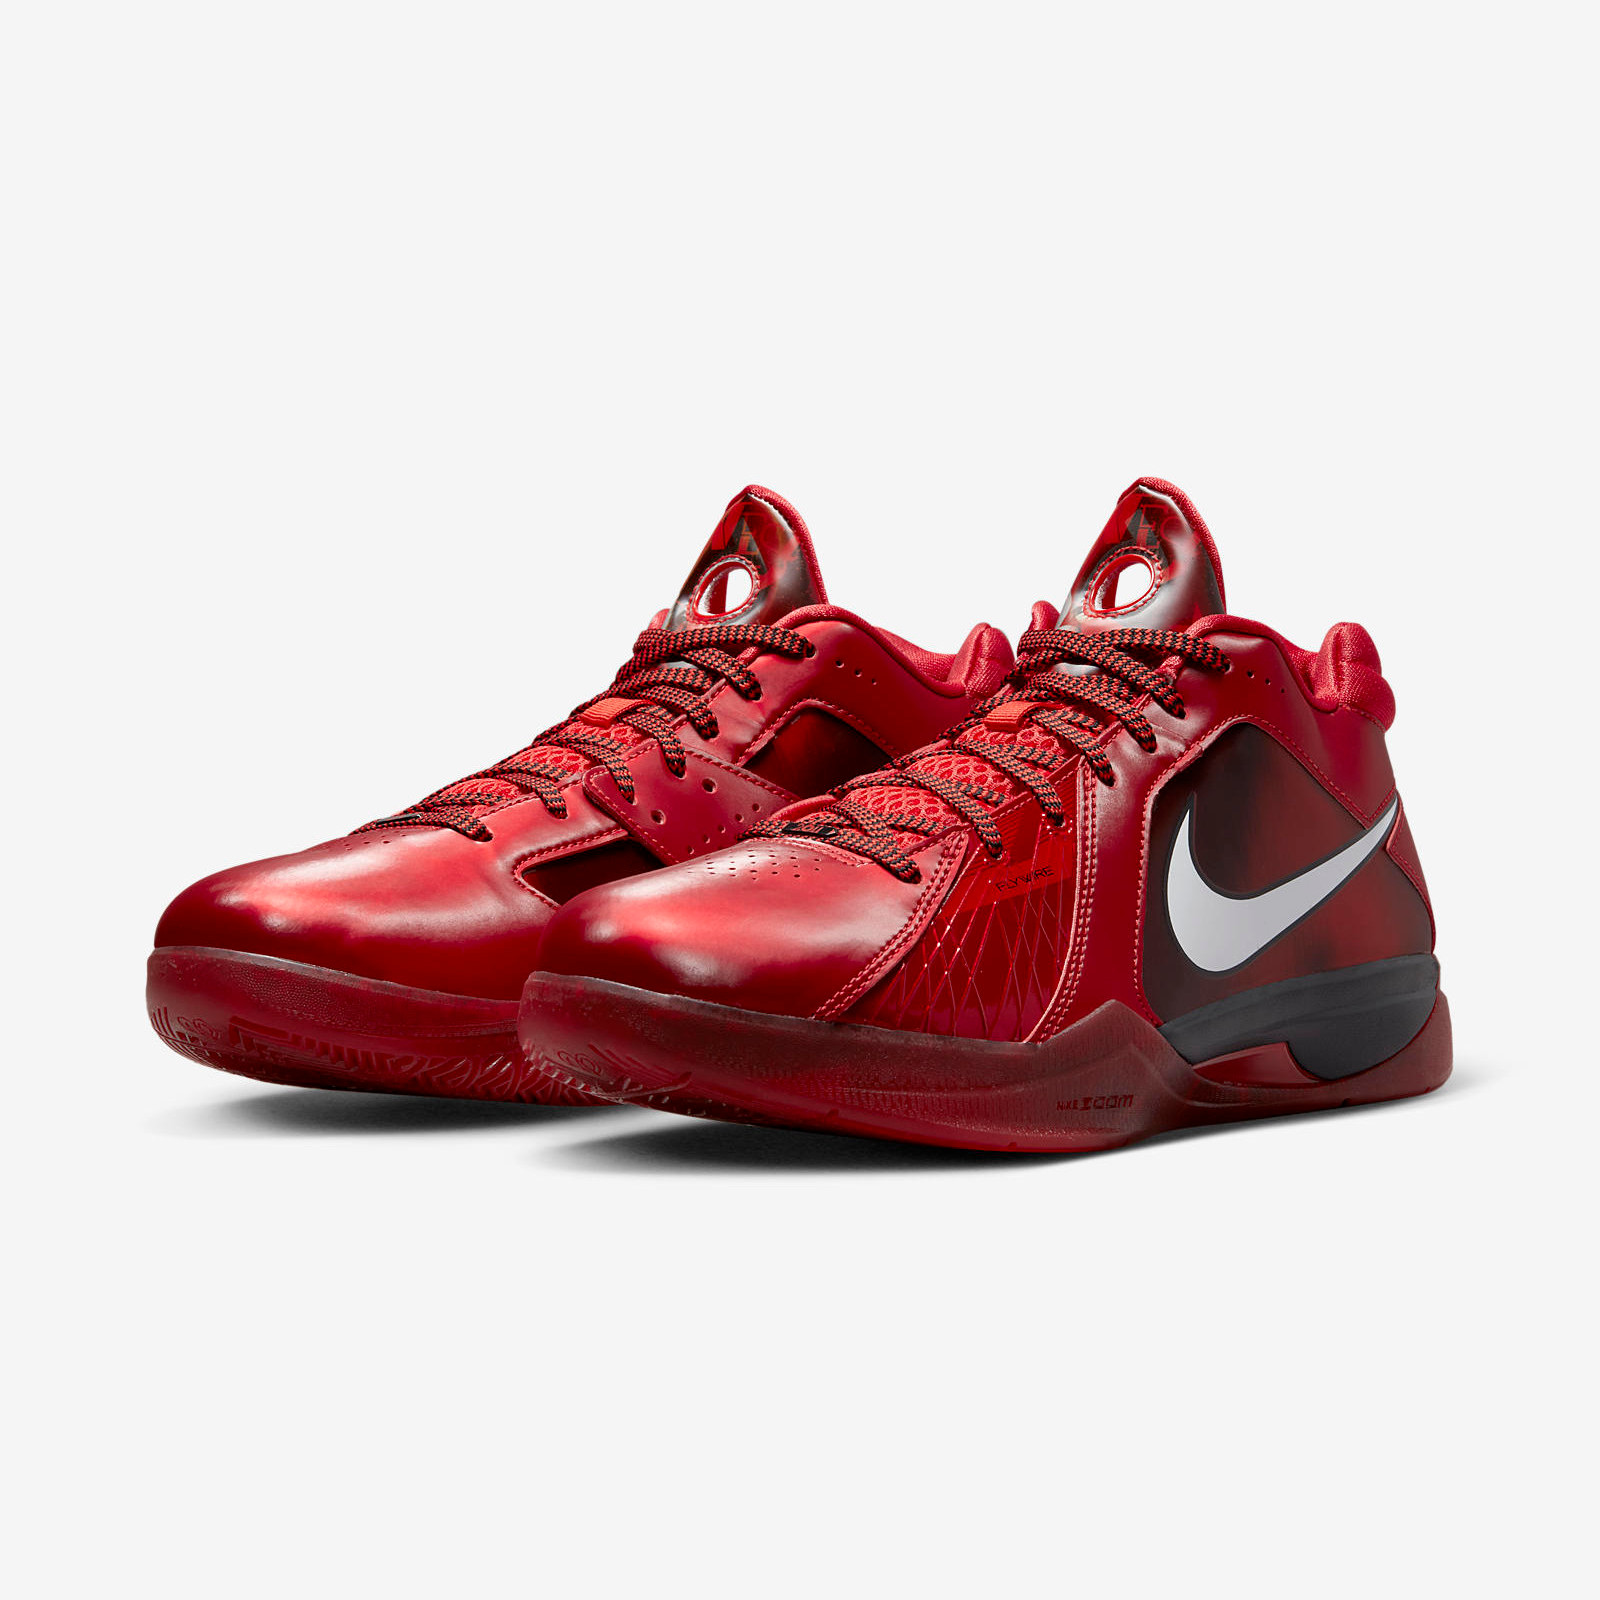 Nike Zoom KD 3
« Challenge Red »